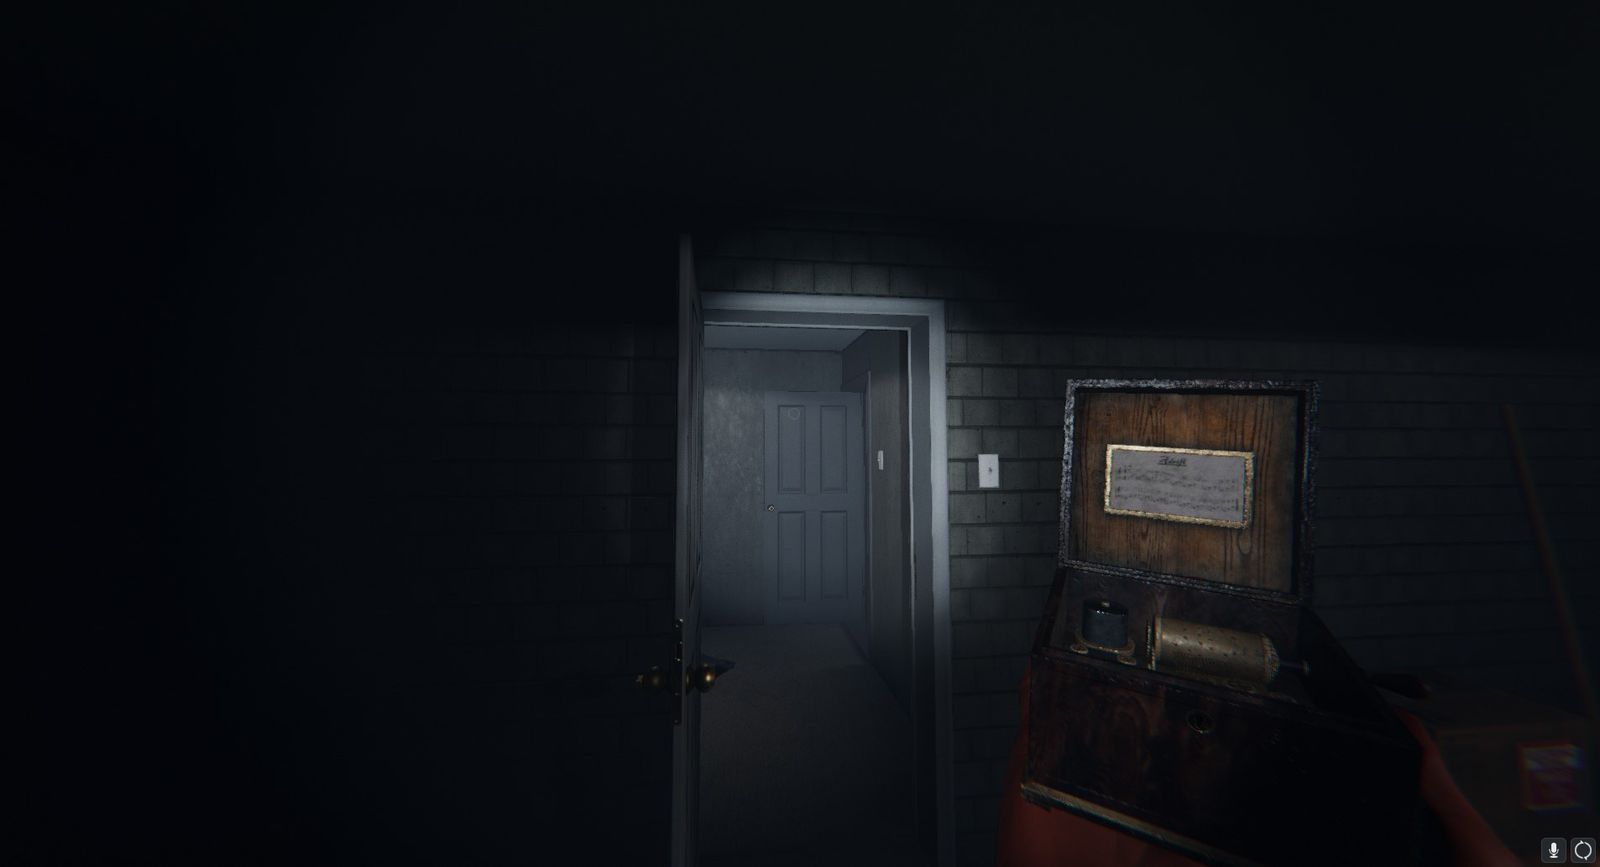 The Music Box, one of six Cursed Possessions, is held by the player in the garage of a house in Phasmophobia.